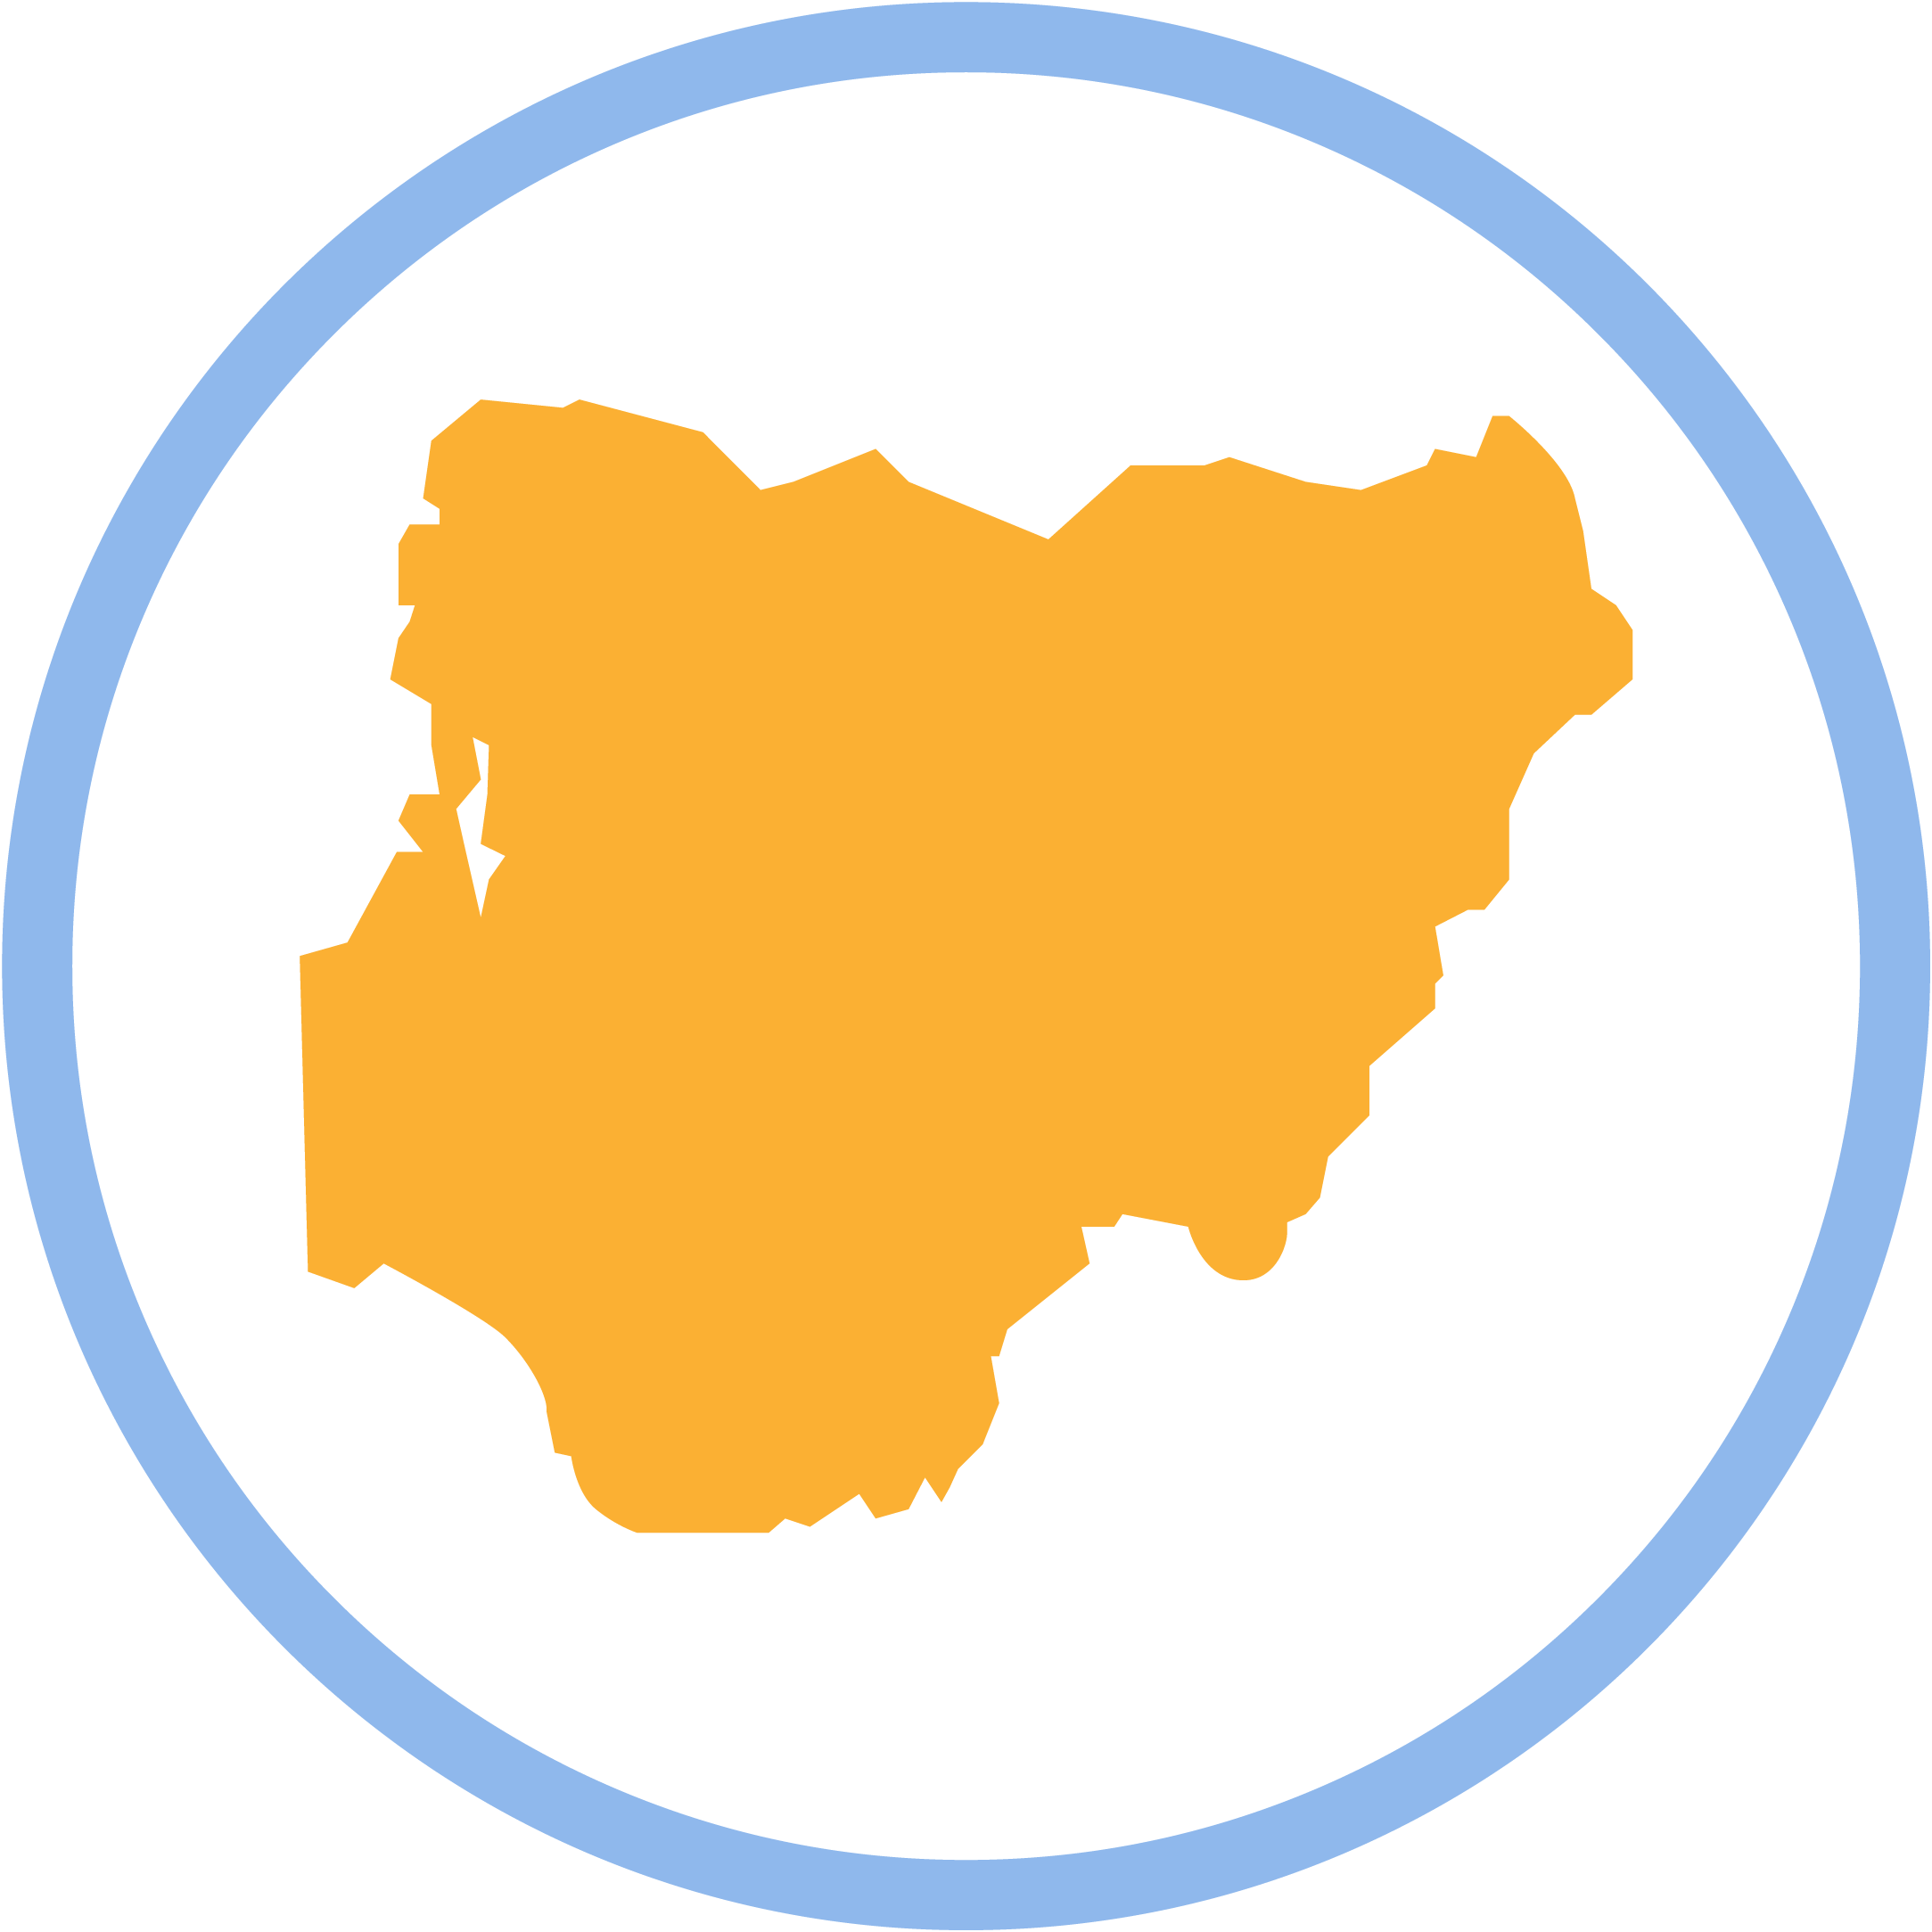 icon containing outline of the country of Nigeria